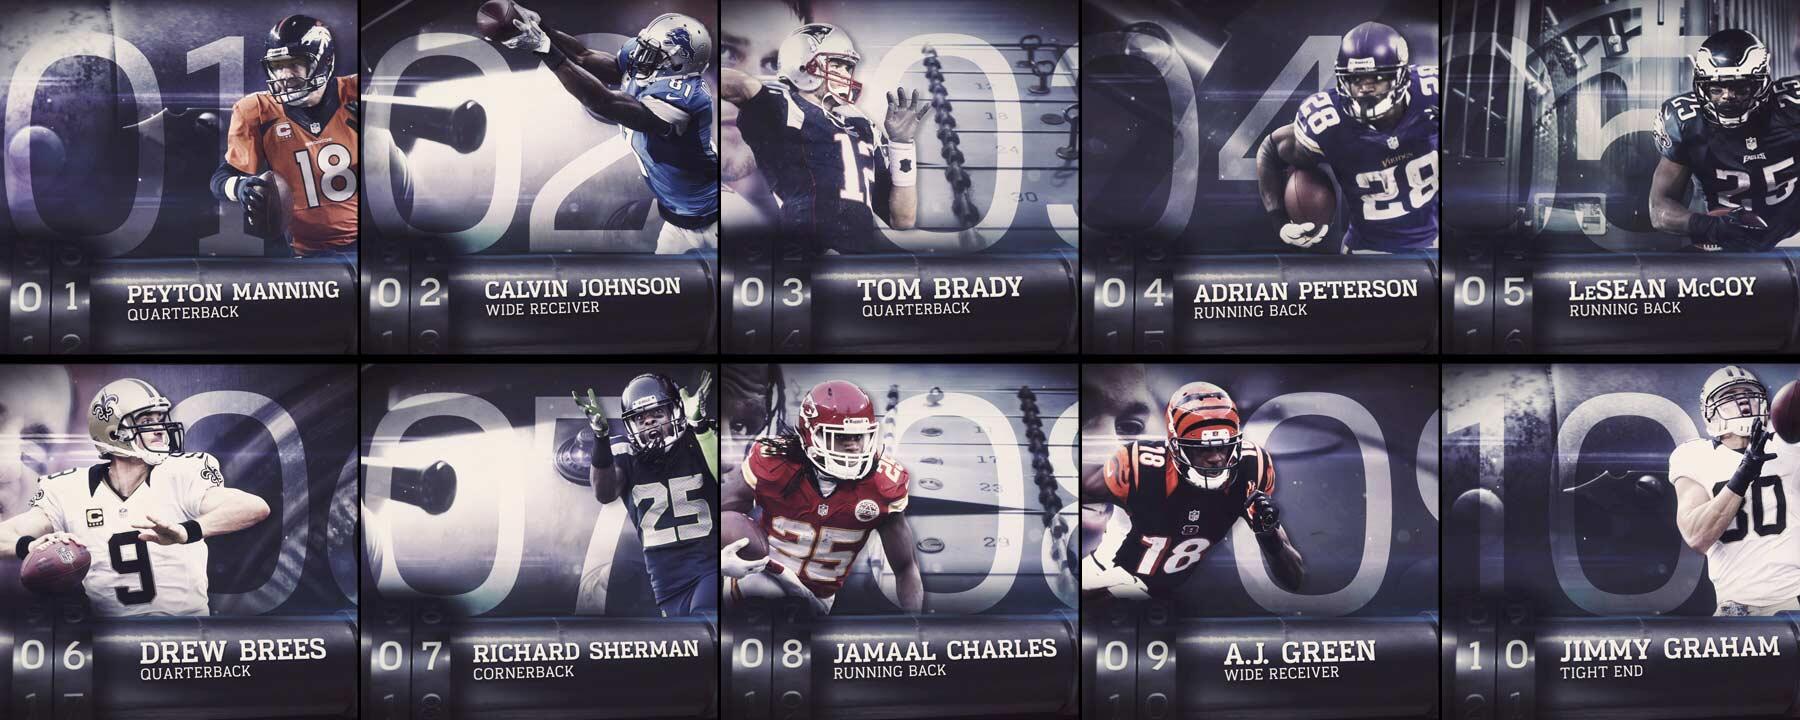 NFL on Twitter: "The Top 100 of 2014 (#10-1): http://t.co/rGm56ExH72 #NFLTop100 http://t.co/i6RNxiqEaF" / Twitter